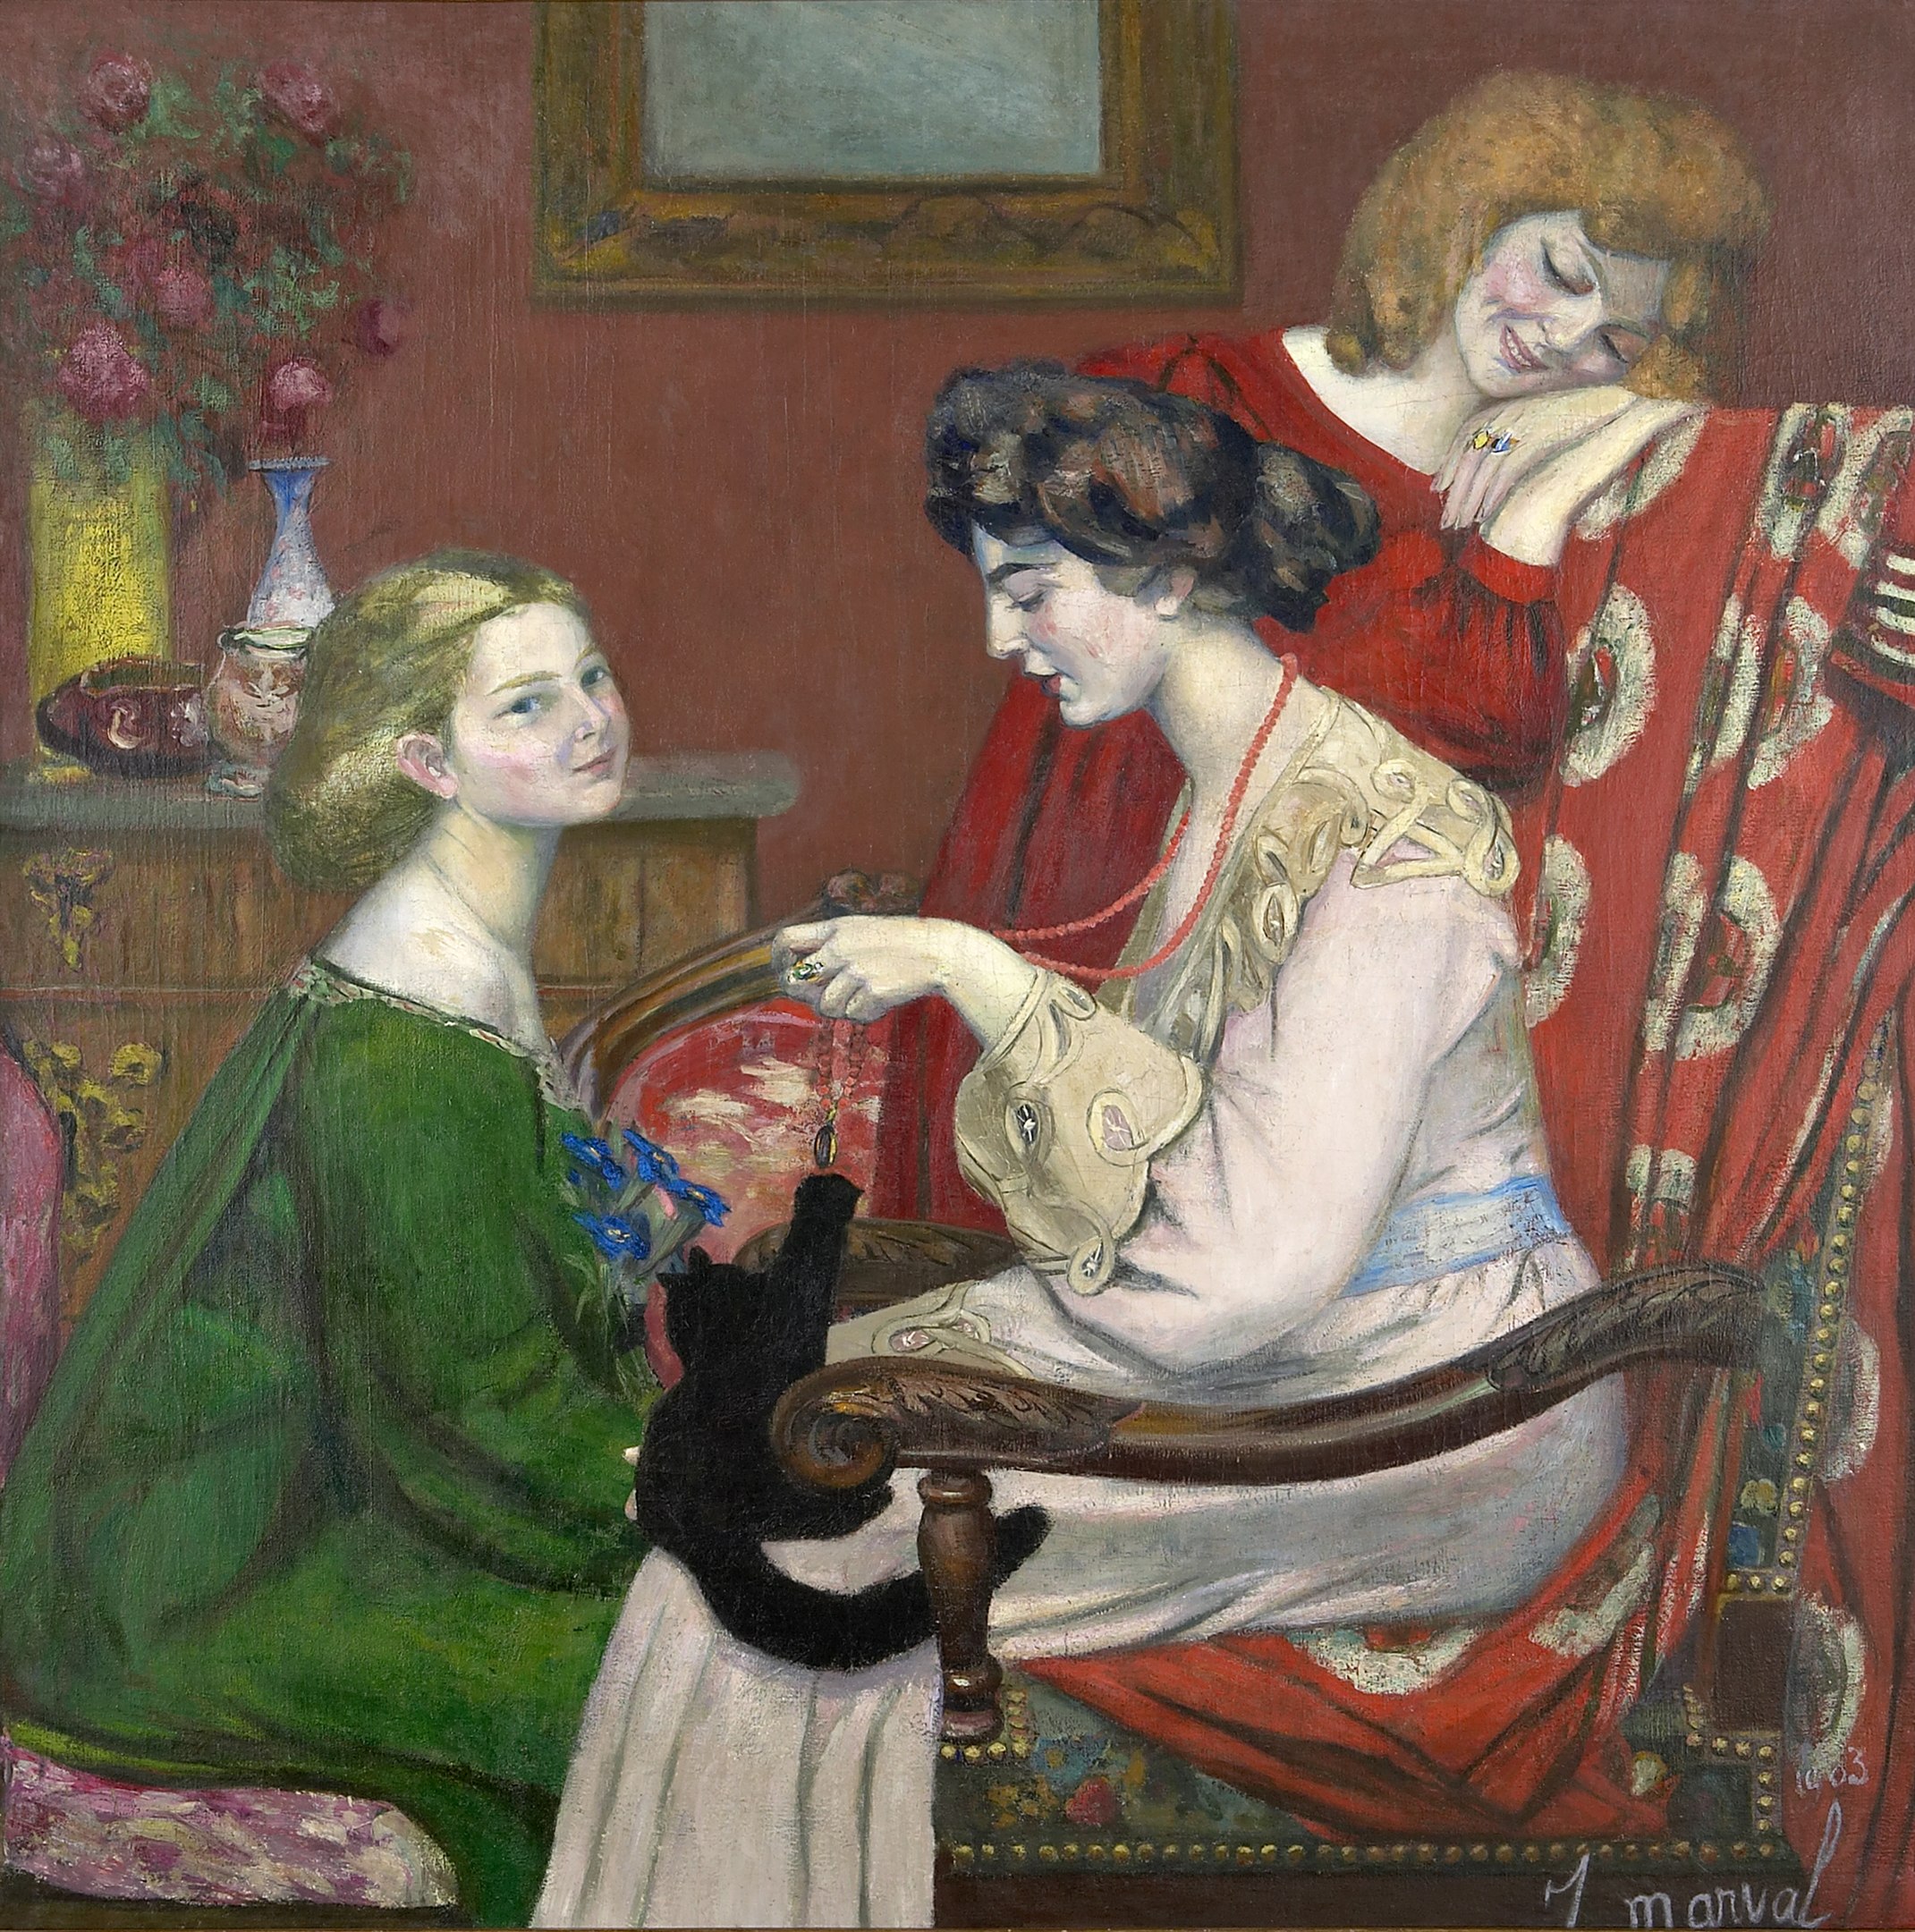 A woman playing with a cat on her lap in a bedroom with two other women beside her